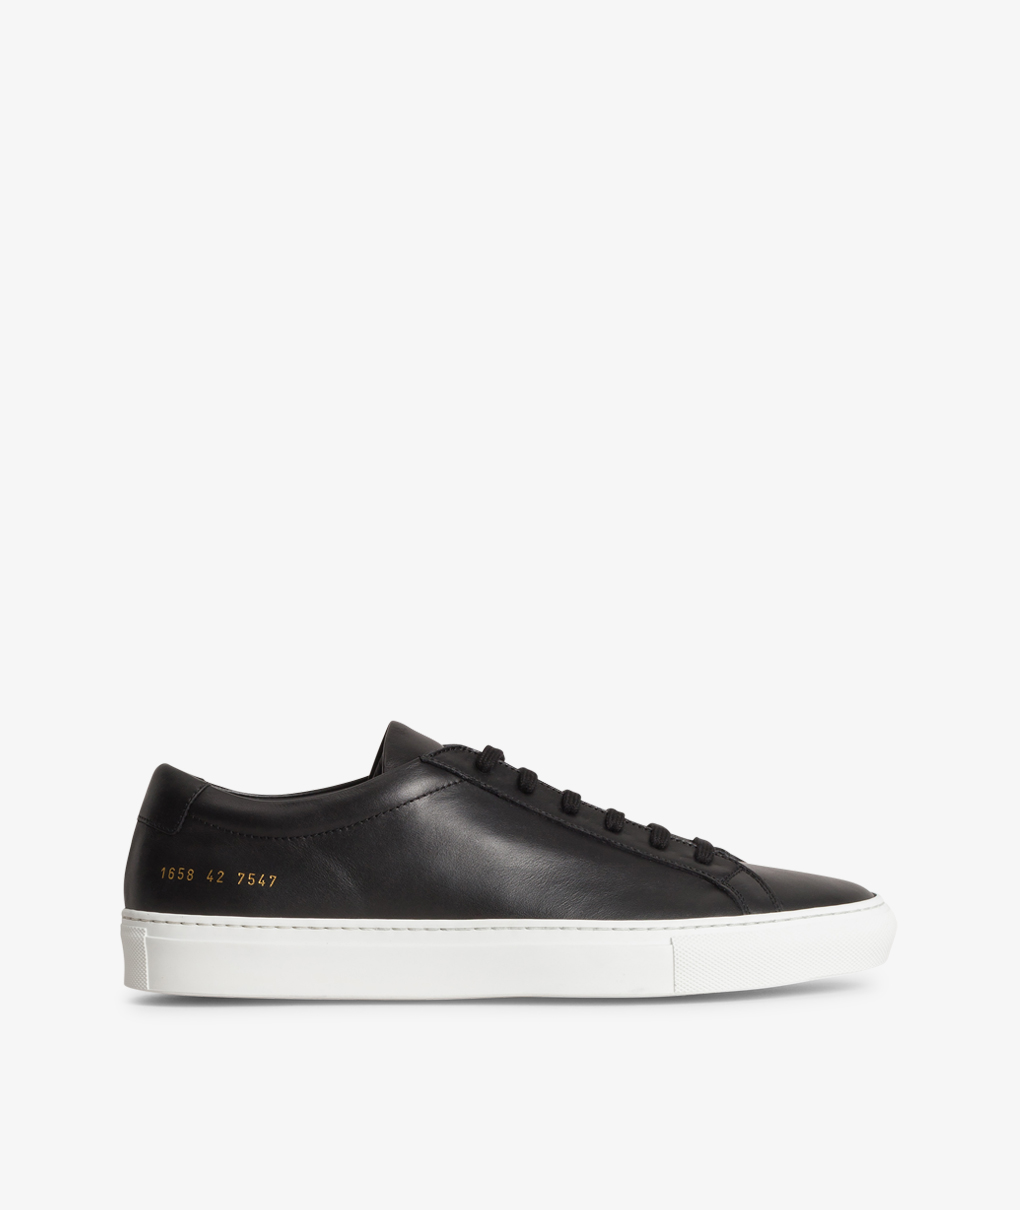 common projects white low